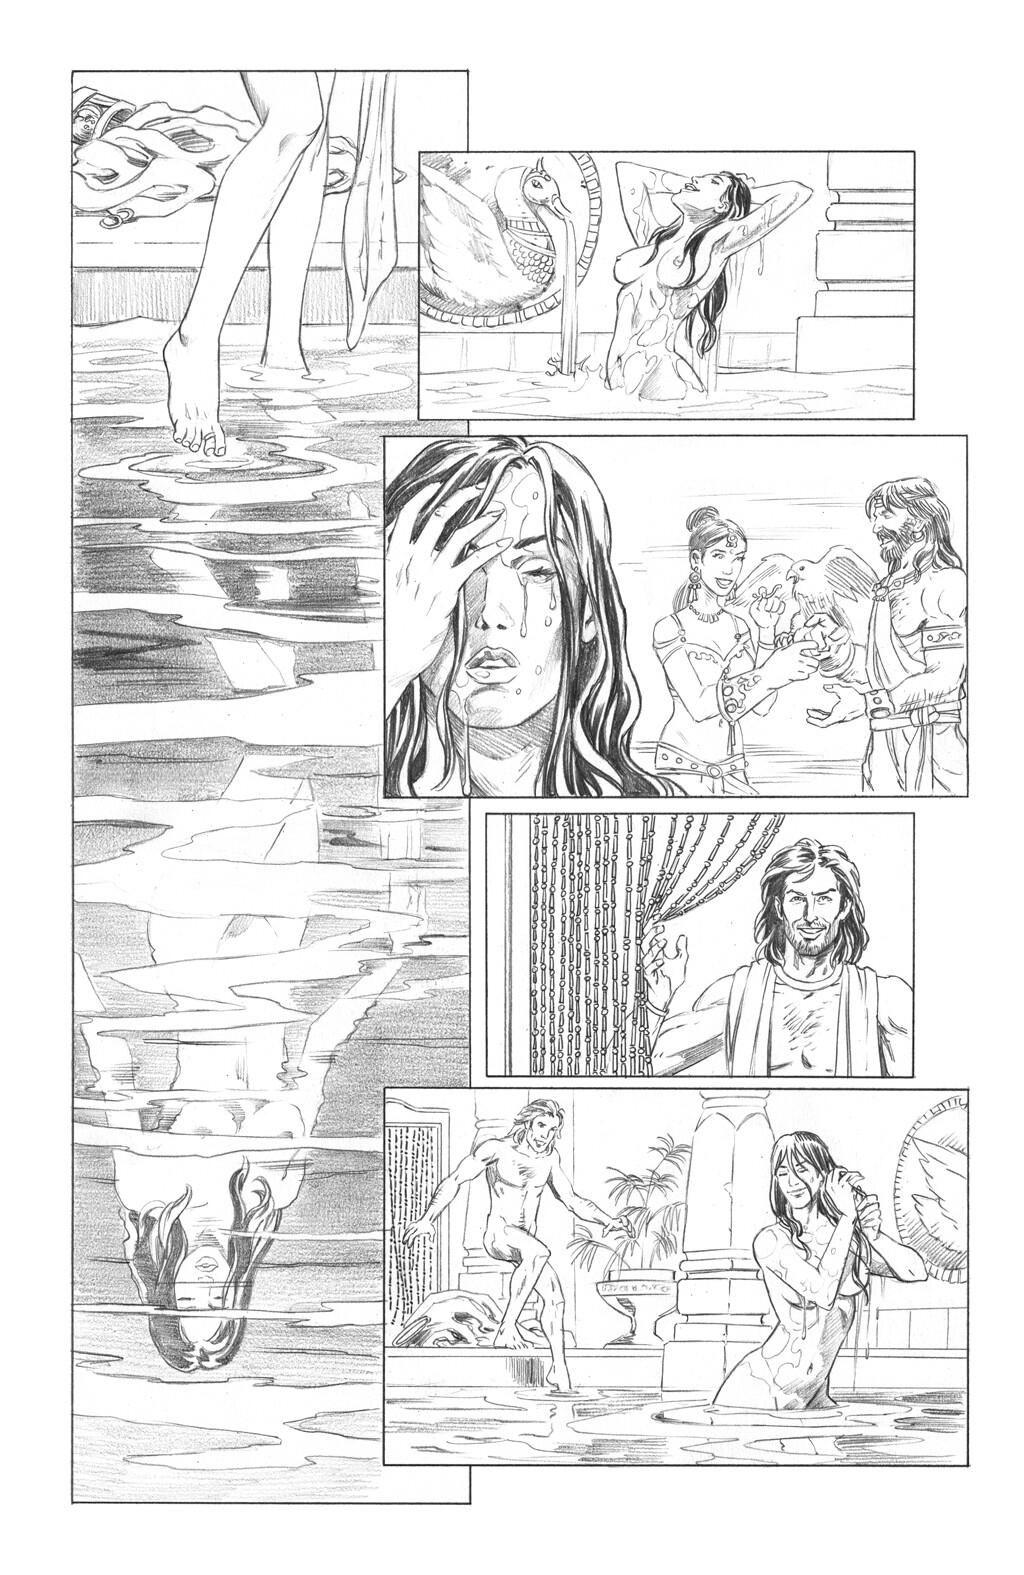 Scions of the Cursed King 
Page 17 pencil